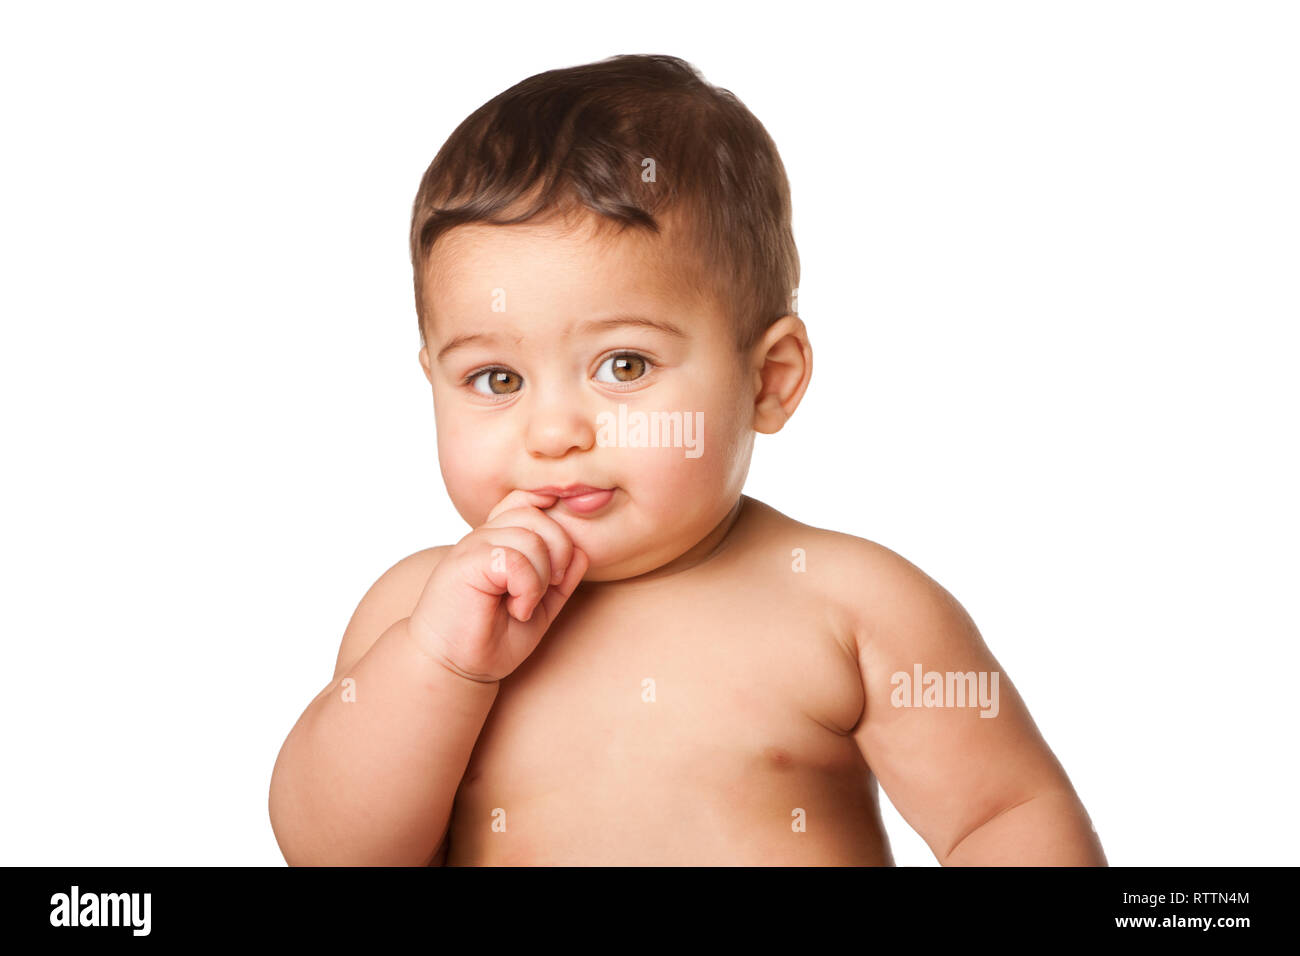 Cute happy innocent baby infant face with big light green eyes and finger in mouth, childhood concept, on white. Stock Photo